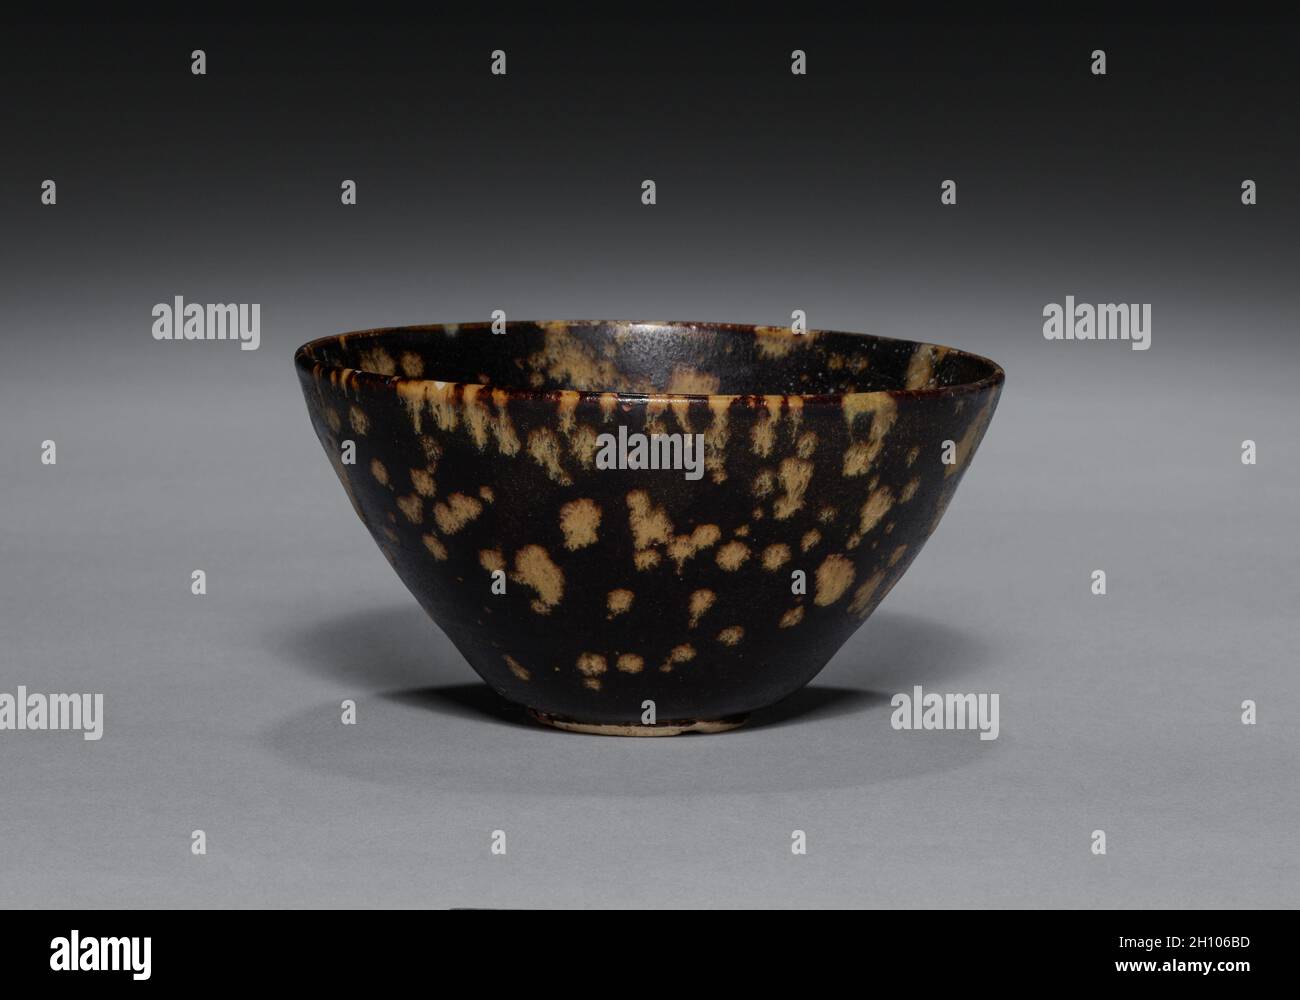 Tea bowl with tortoise shell glaze, 1100s–1200s. China, Jiangxi Province, Southern Song dynasty (1127-1279). Brown glazed stoneware with 'tortoise shell' pattern, Jizhou ware; overall: 5.9 x 11.5 cm (2 5/16 x 4 1/2 in.). Stock Photo